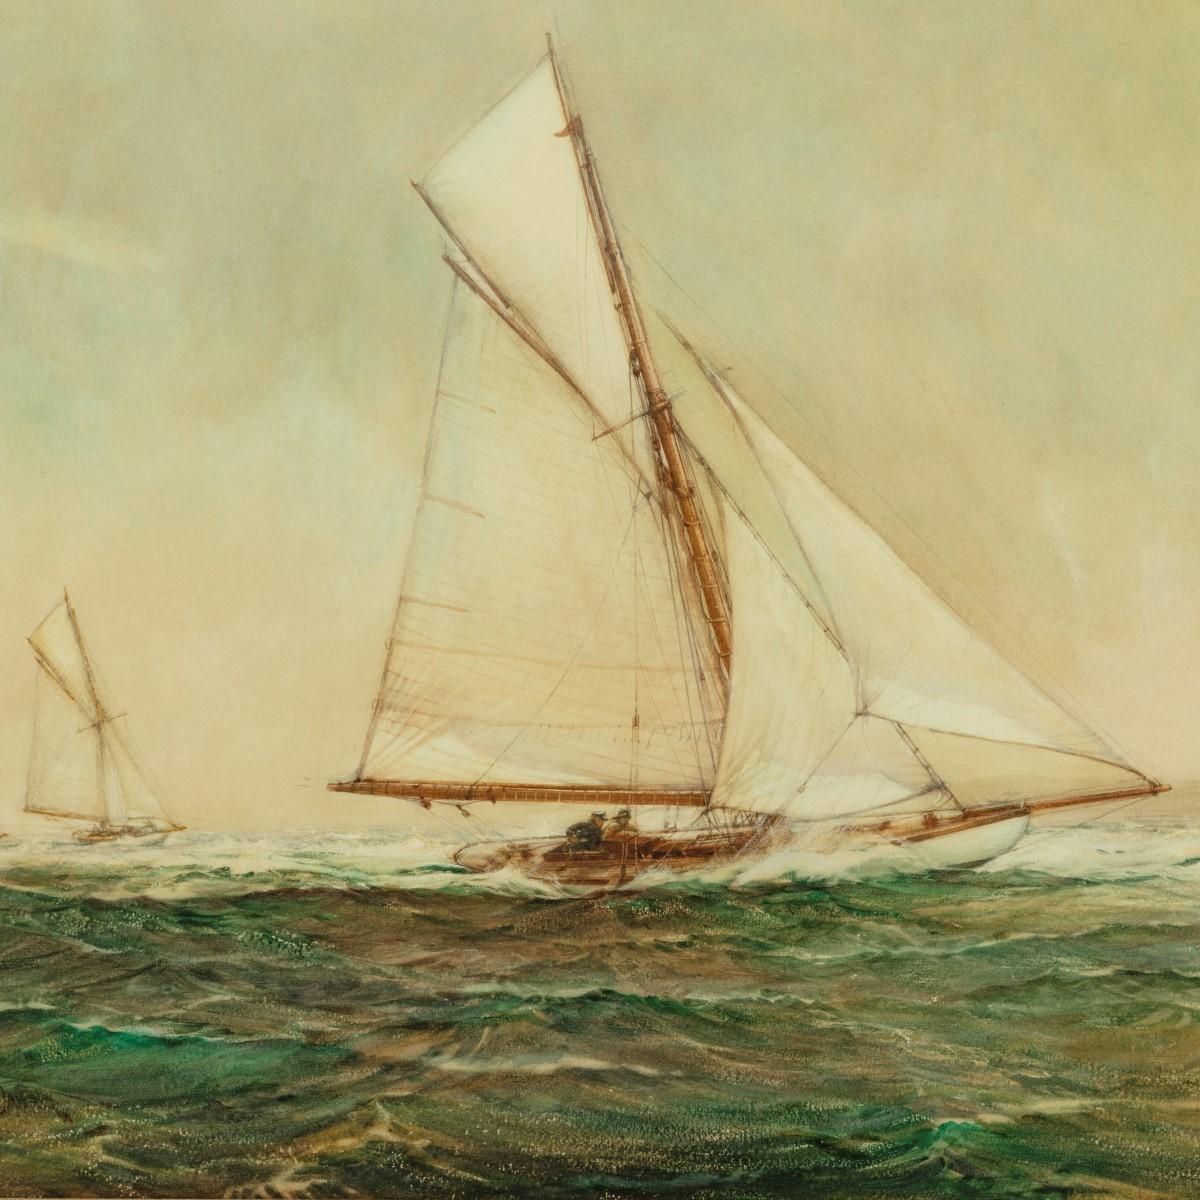 ‘A Windy Day’ by Montague Dawson,watercolour heightened with white on artist board showing a gaff rigged yacht in the foreground with two astern in the distance, the water realistically painted with an approaching line squall to weather, signed